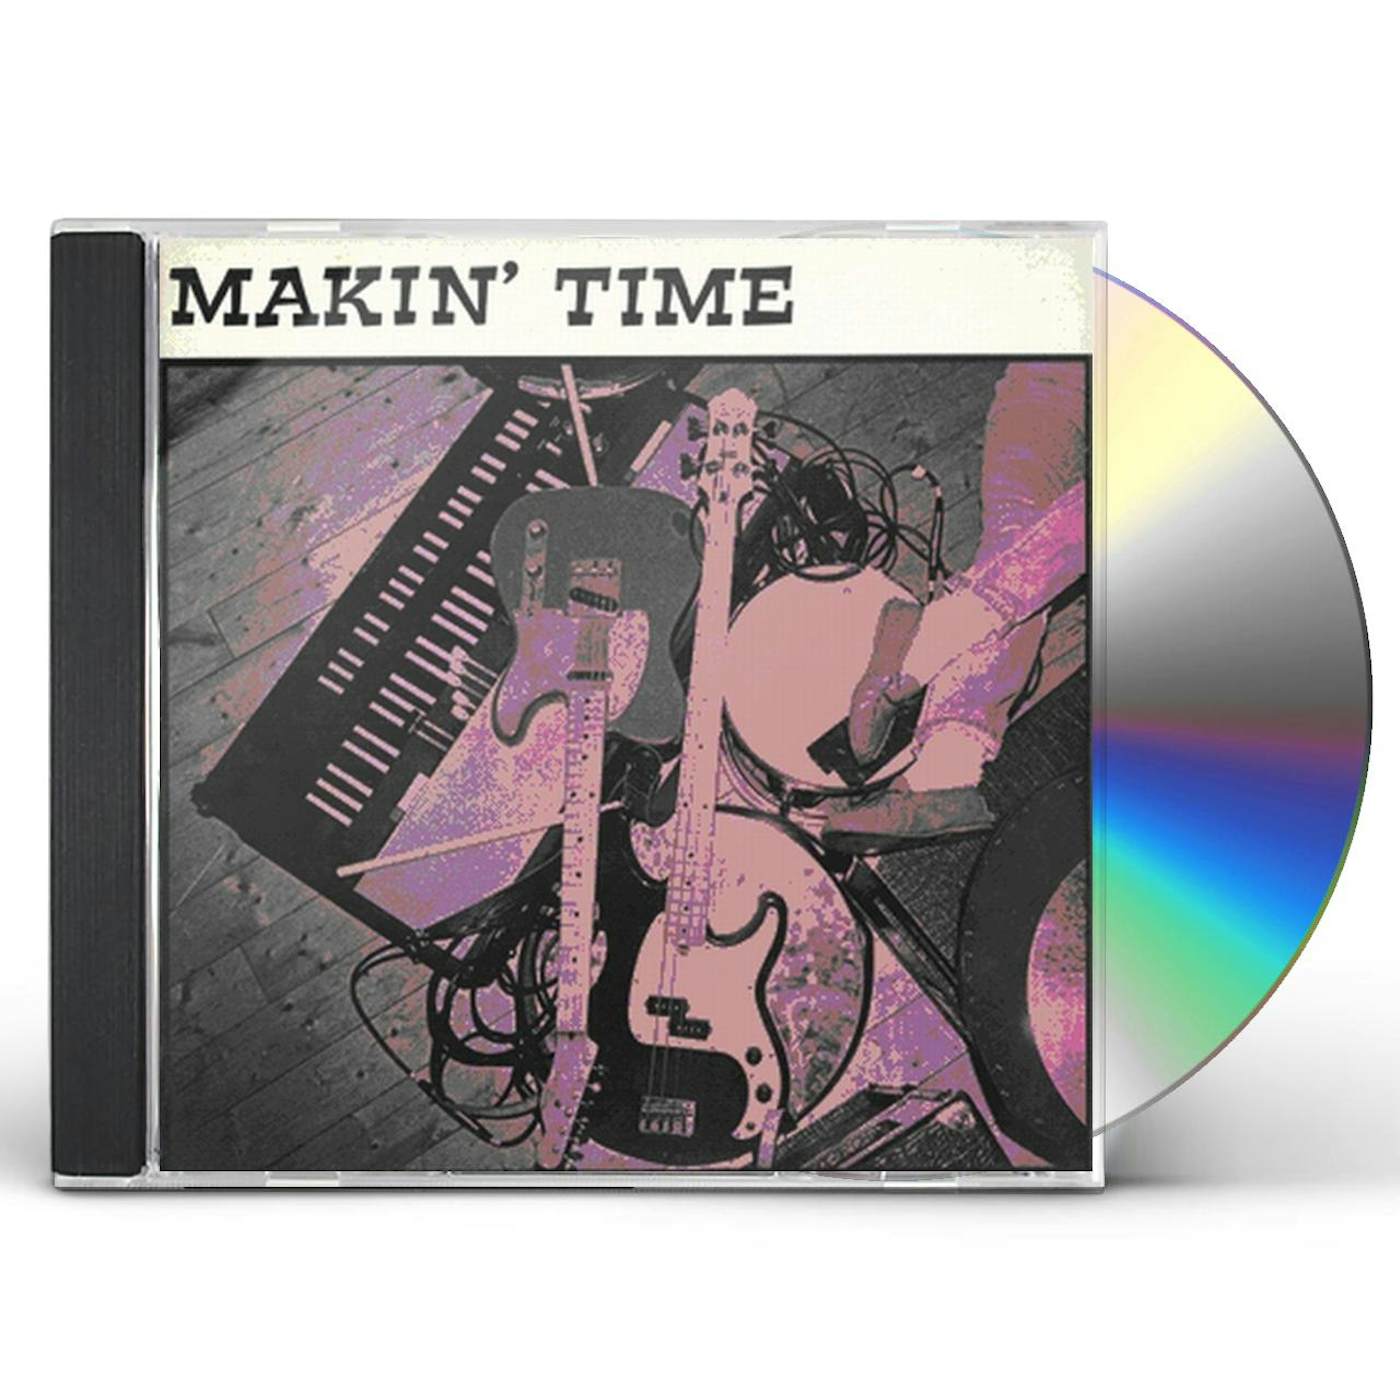 Makin' Time NO LUMPS OF FAT OR GRISTLE CD